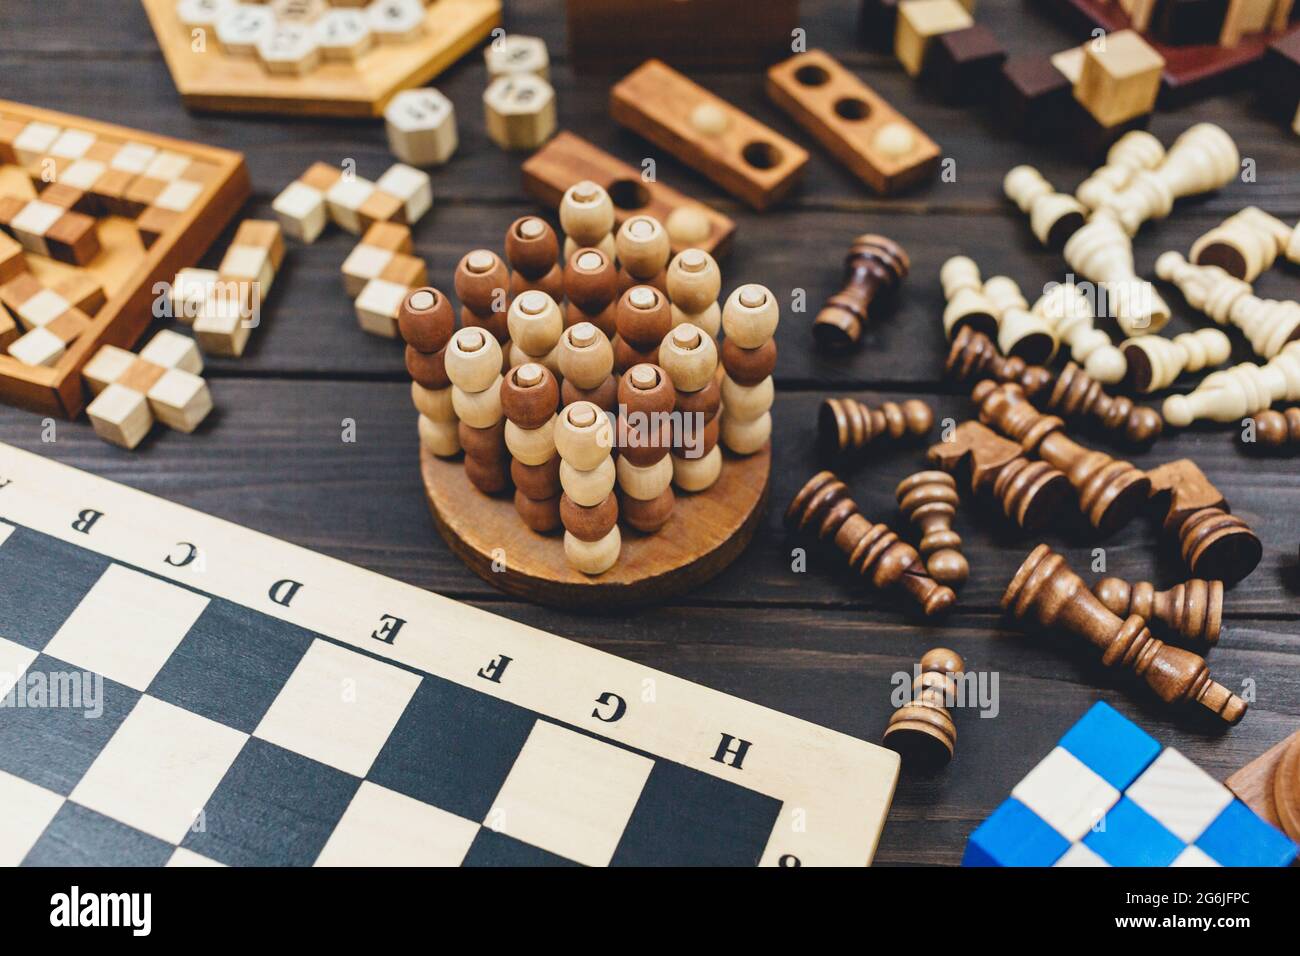 Compass Chess Piece On Cube Wood Stock Photo 2291826529